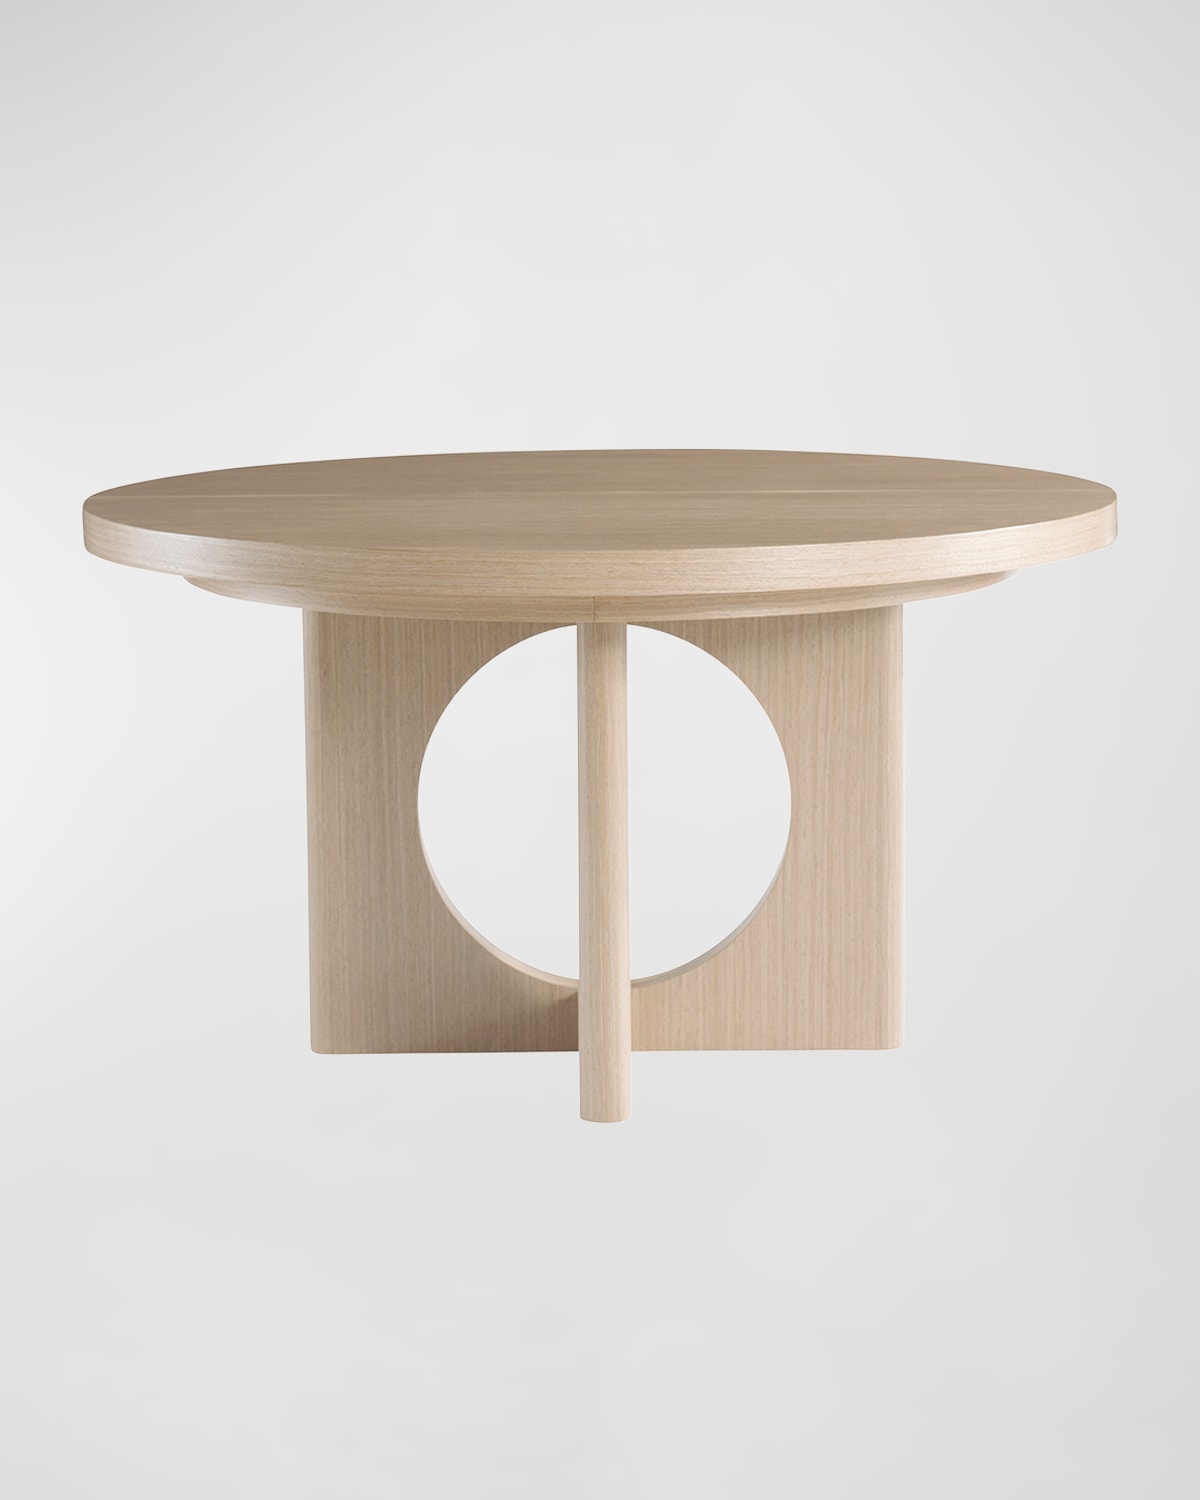 Modulum Round Dining Table with Leaf